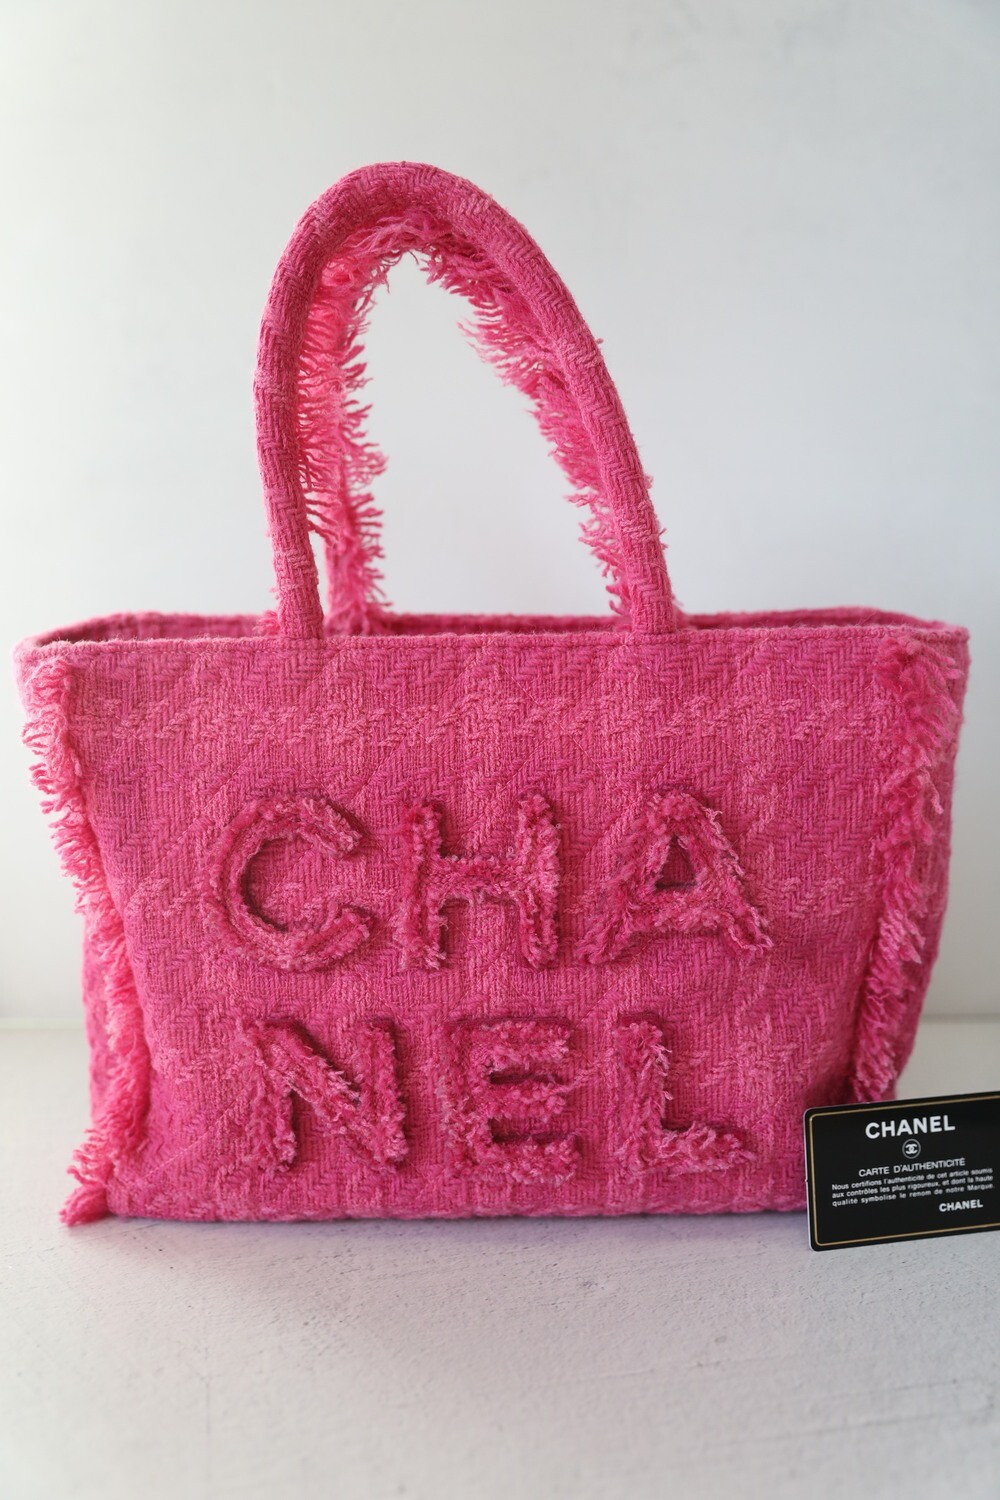 Chanel Tote, Pink Fringe Tweed, Preowned No Dustbag WA001